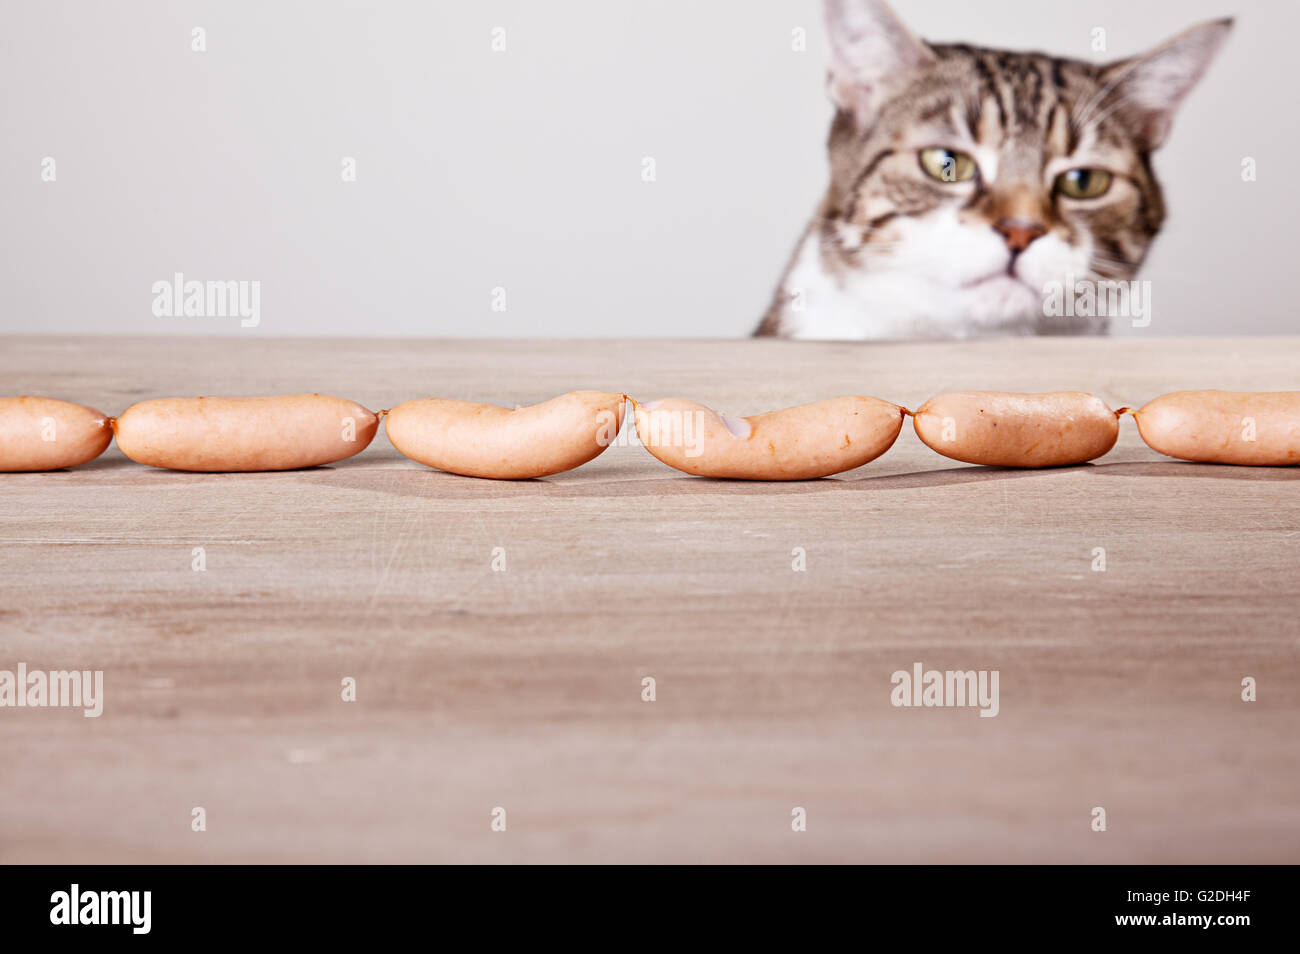 Curious Cat being tempted by sausages on table Stock Photo